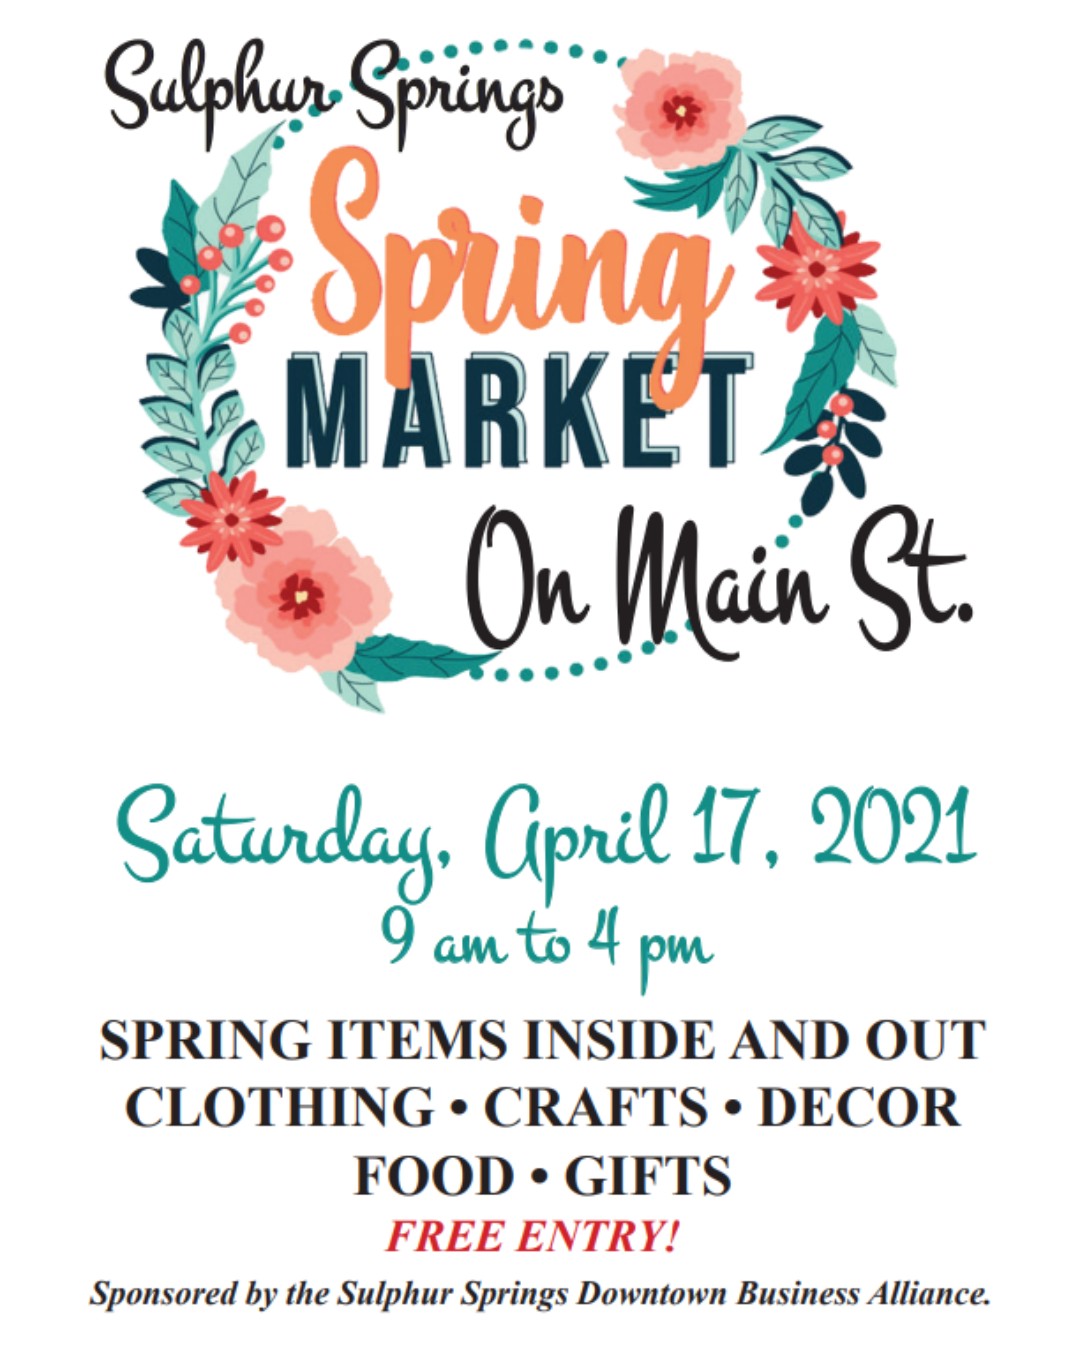 Local Vendors and More Planned for Spring Market on Main St. on Saturday